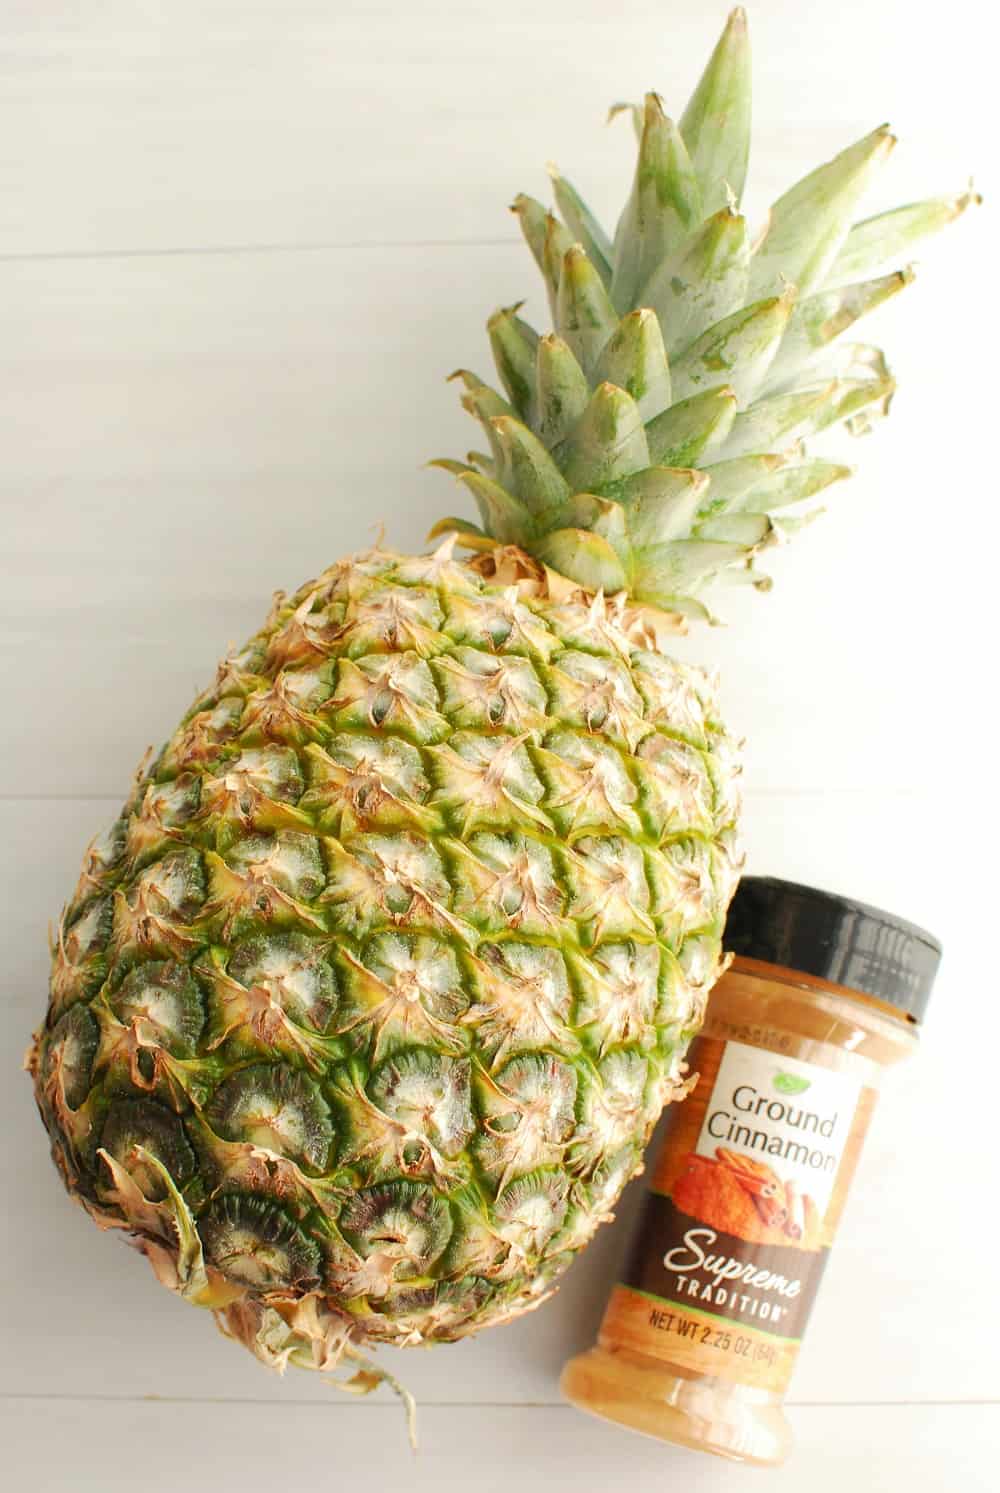 a whole pineapple and a bottle of cinnamon